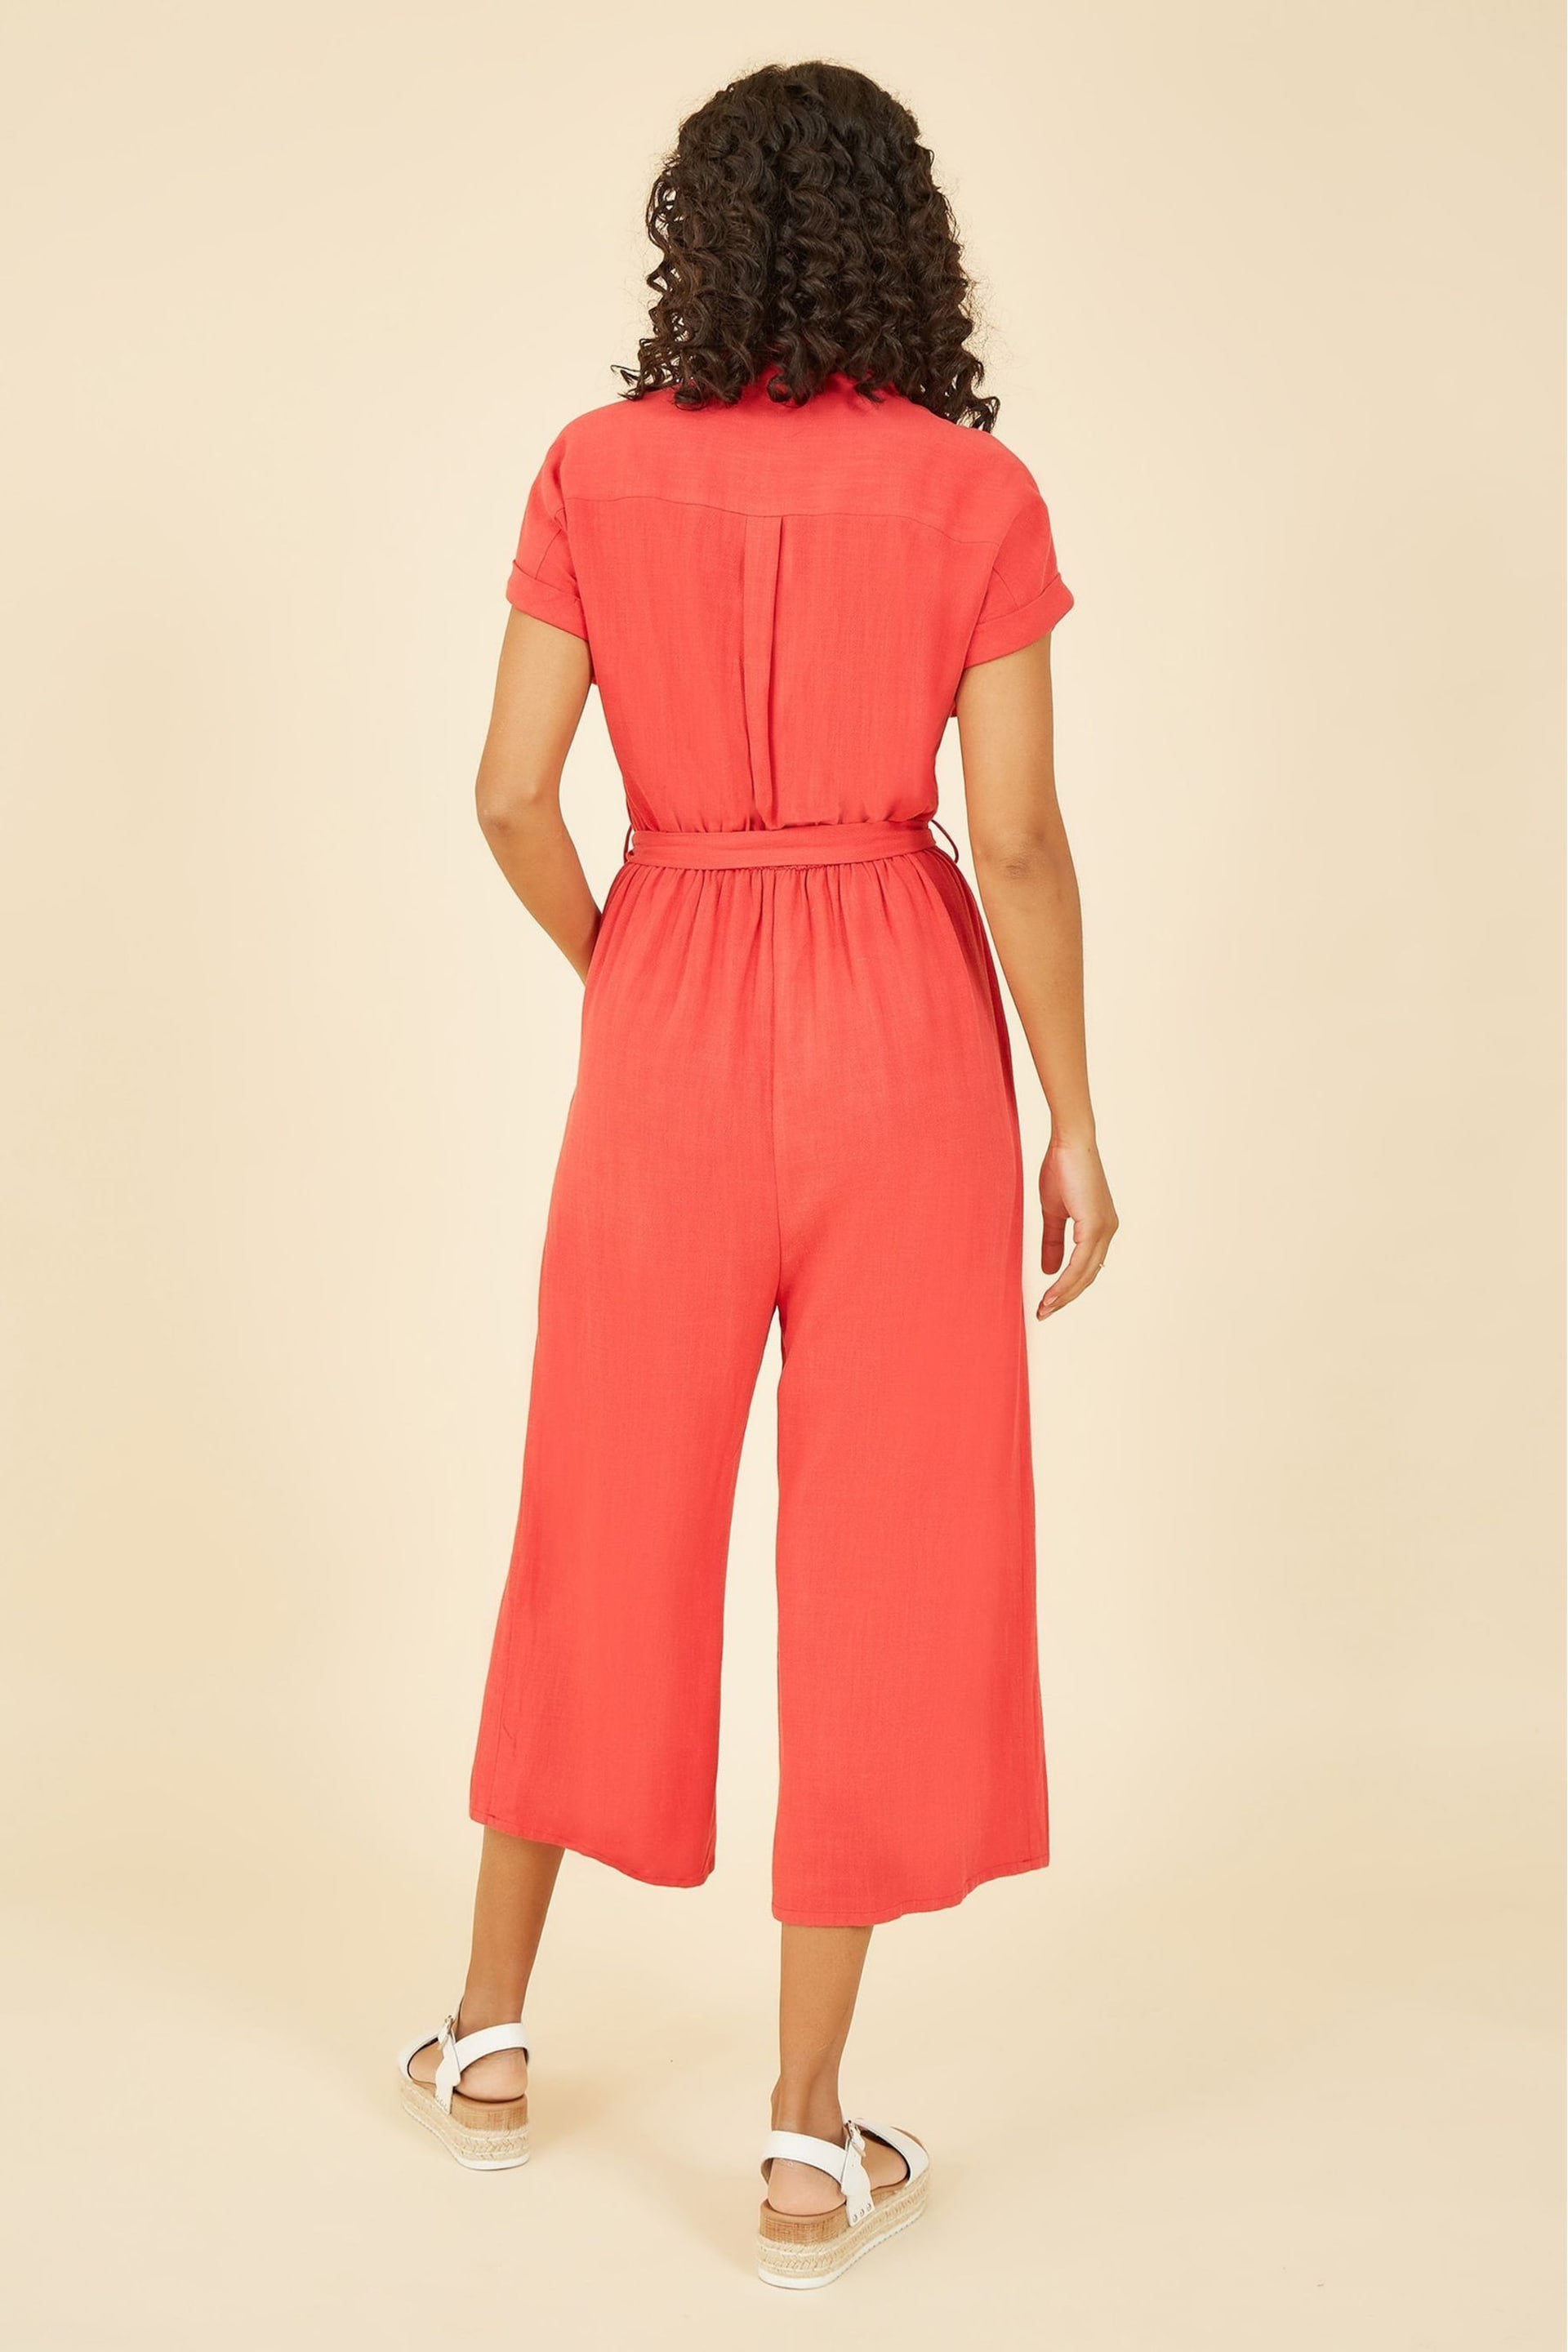 Yumi Red Button up Jumpsuit - Image 4 of 5